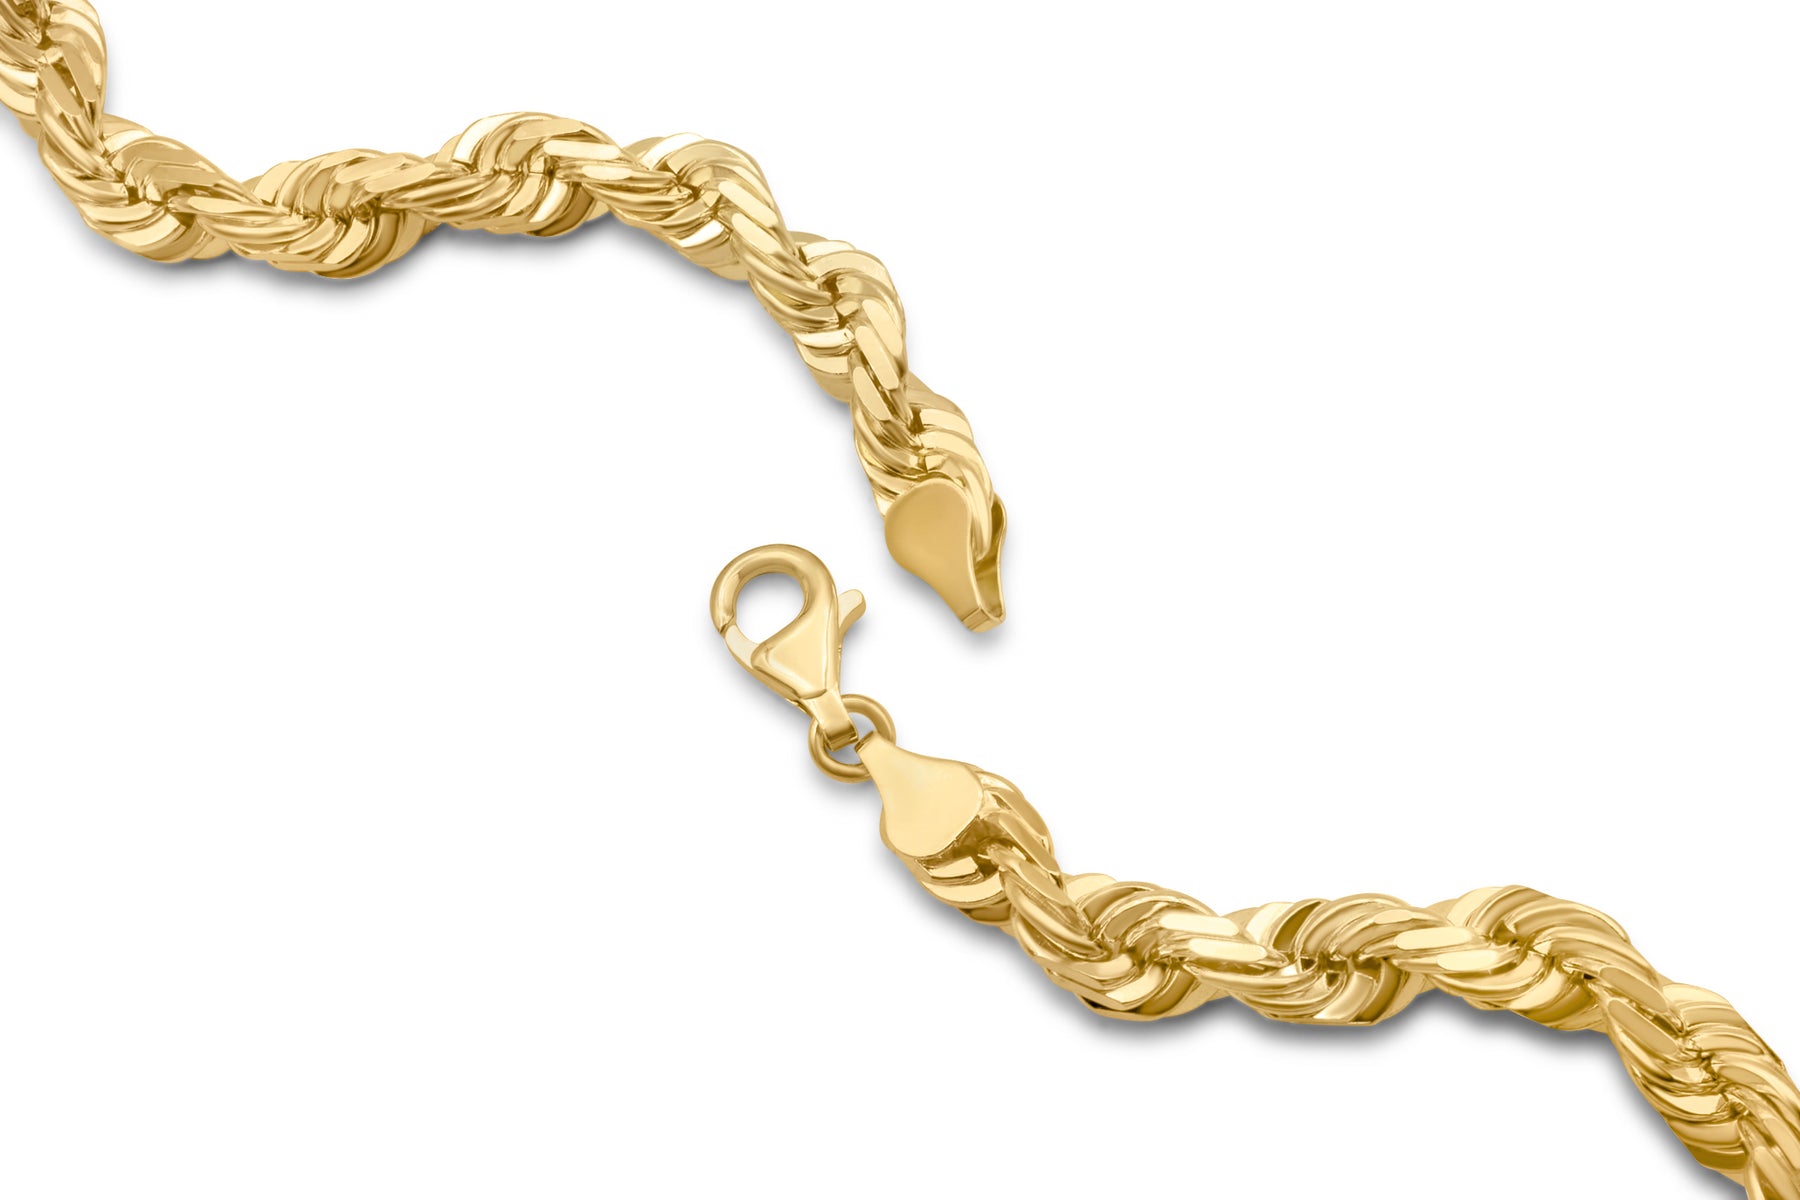 10K Yellow Gold Solid Rope Chain 7mm 16 Inches - 84.56 Grams - Nyc Luxury